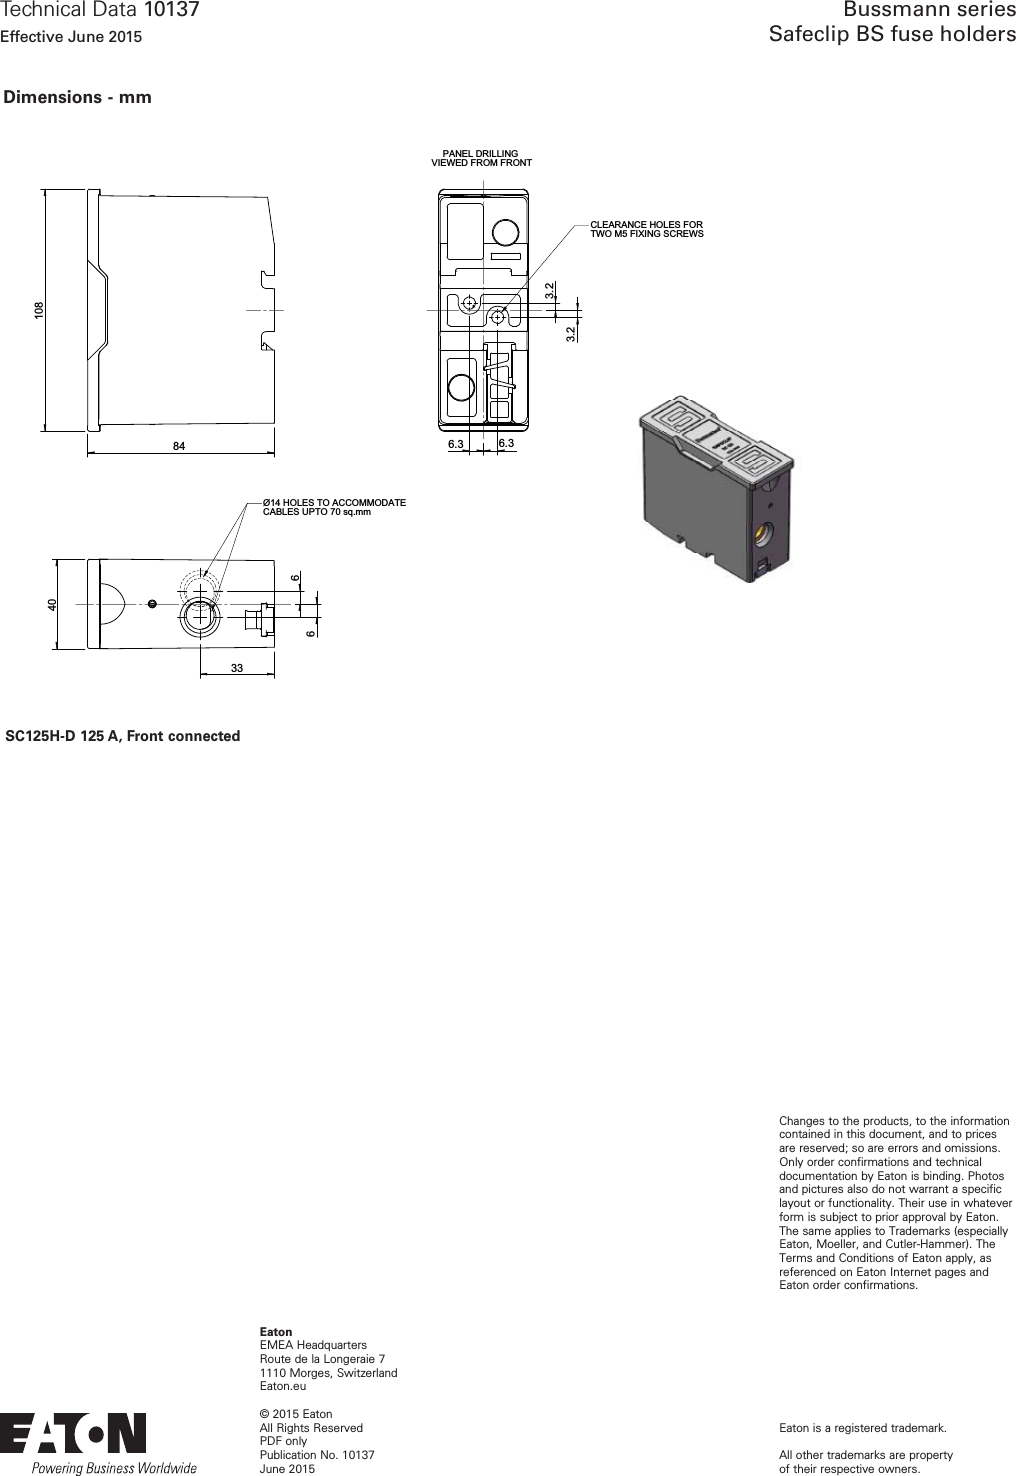 Page 10 of 10 - Bus-iec-ds-10137-safeclipfuseholders  Brochure